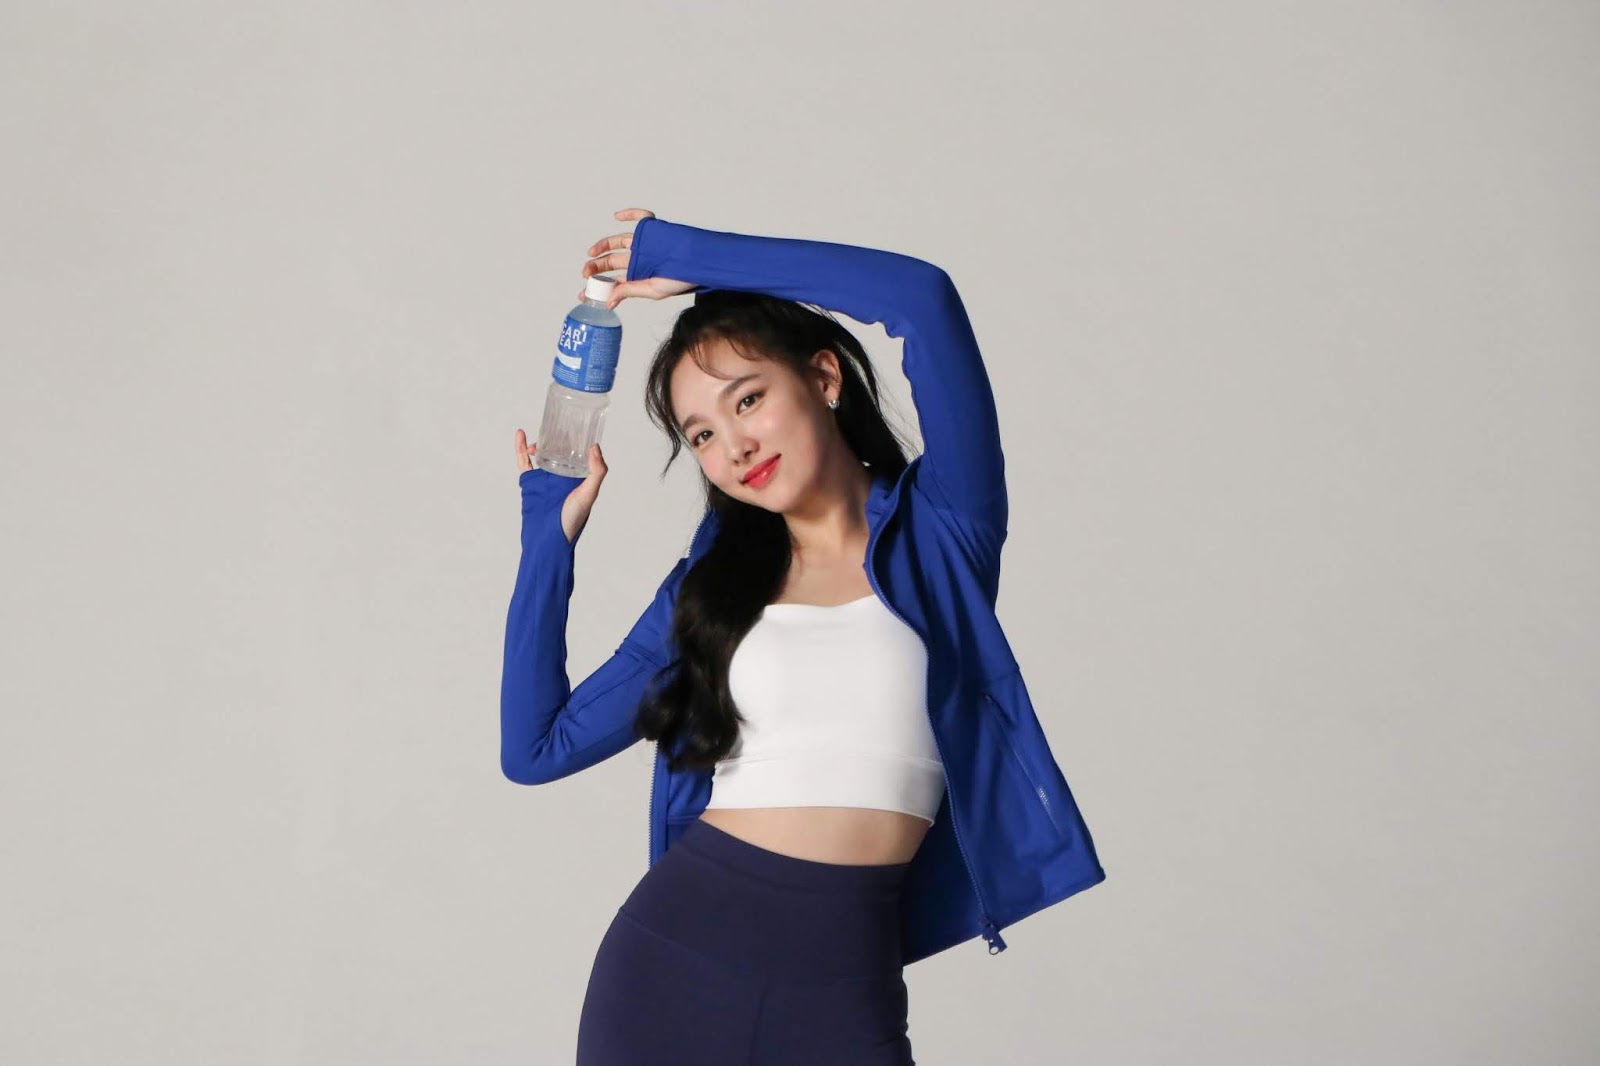 TWICE just made history as the first and only models to endorse Pocari Swea...